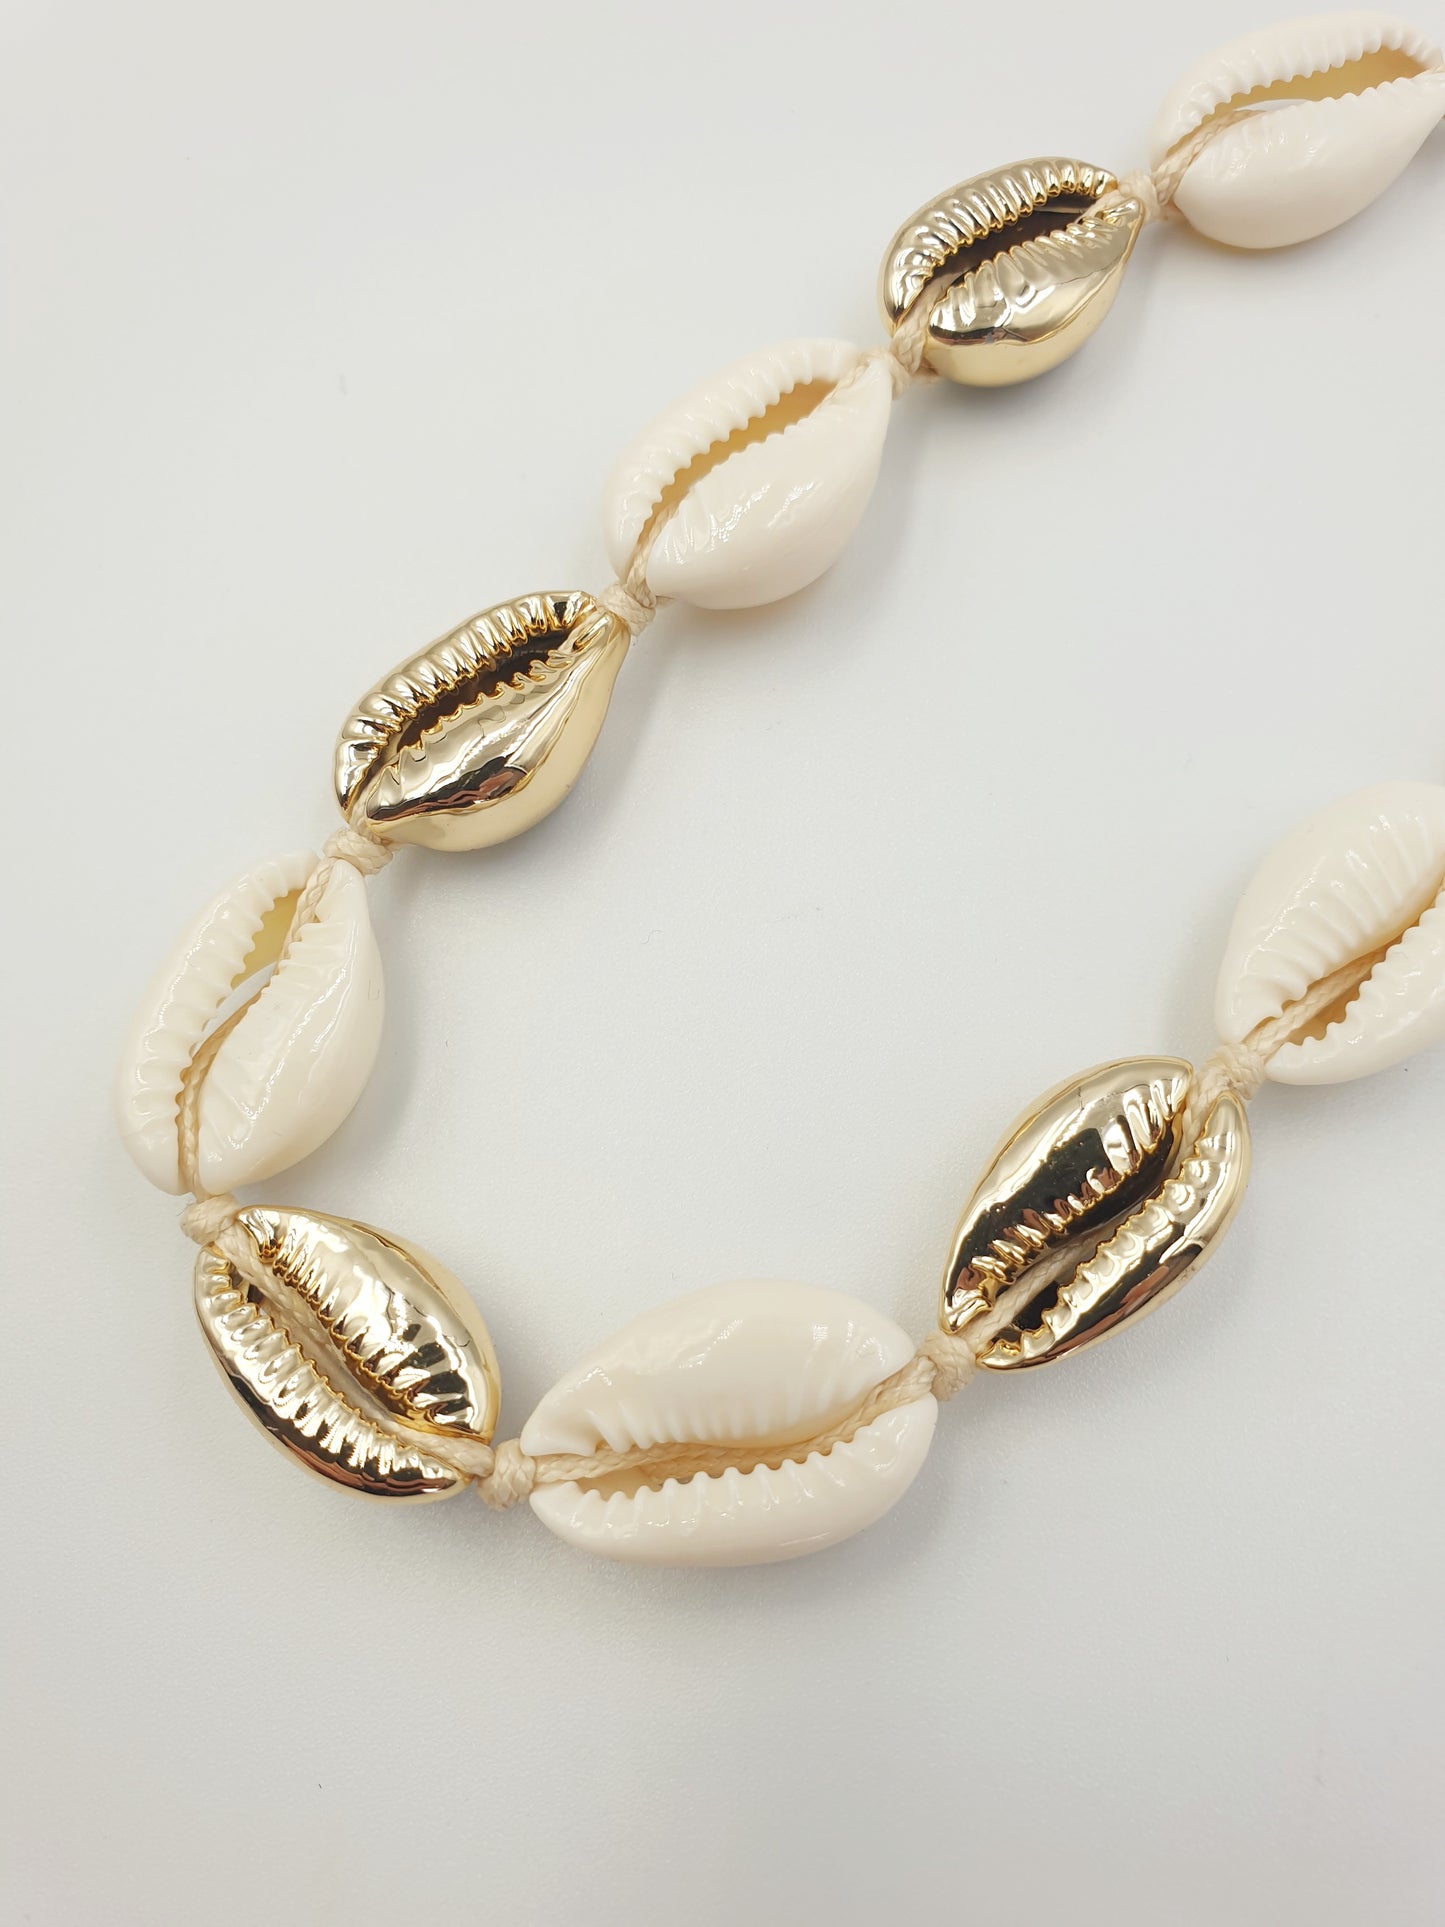 Cowrie Sea Shell Necklace - Beige and Gold